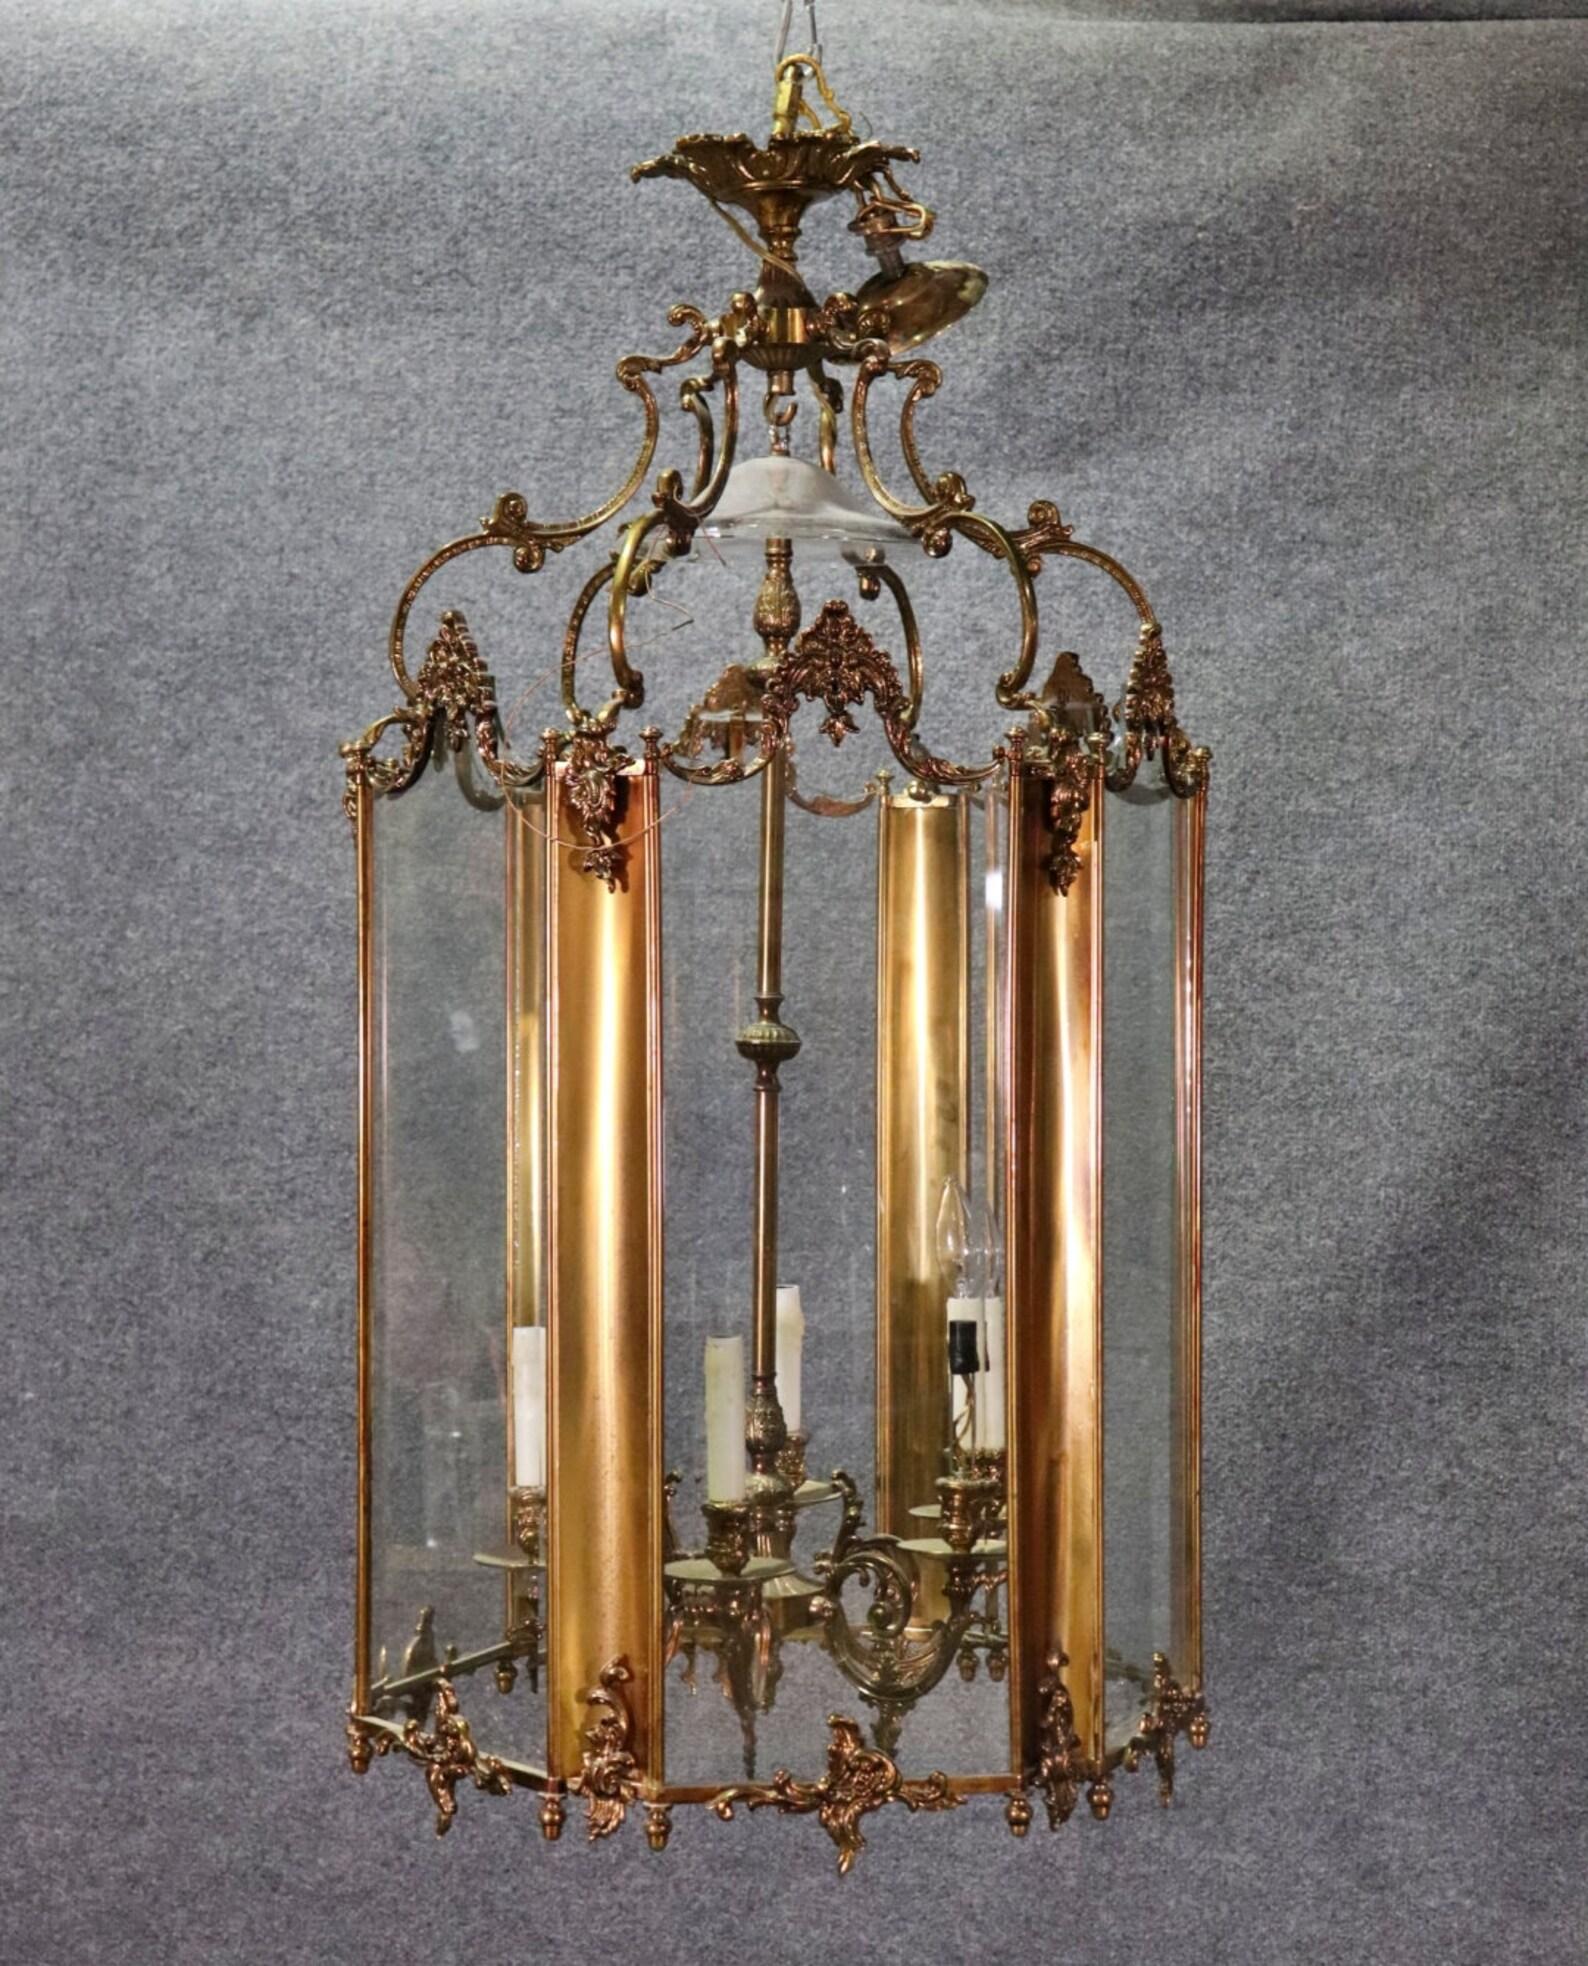 Dimensions- H: 42in W: 22 1/2in D: 21in

This vintage French Rococo style brass lantern chandelier is perfect for you and your home! This would be a wonderful addition to your entryway, kitchen, office or place of your choosing and is bound to bring